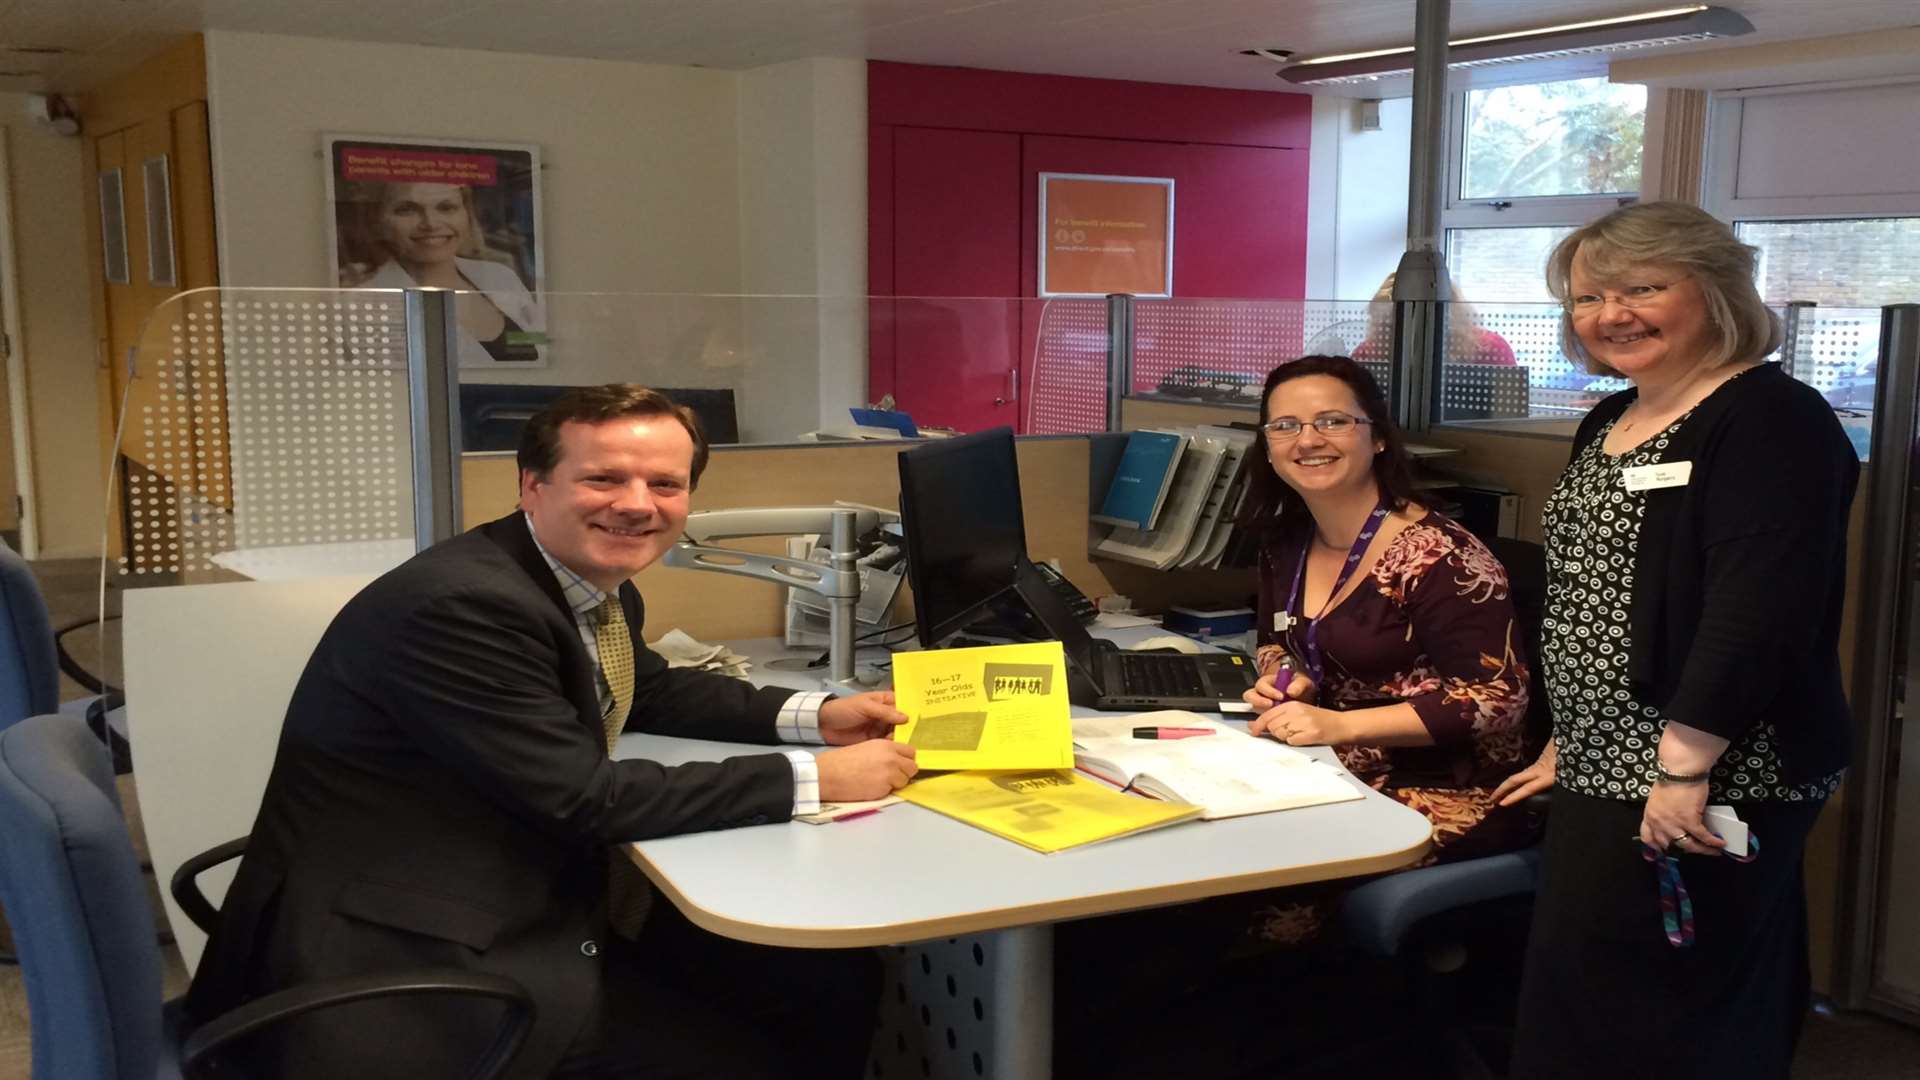 MP for Deal and Dover Charlie Elphicke visiting Dover Jobcentre